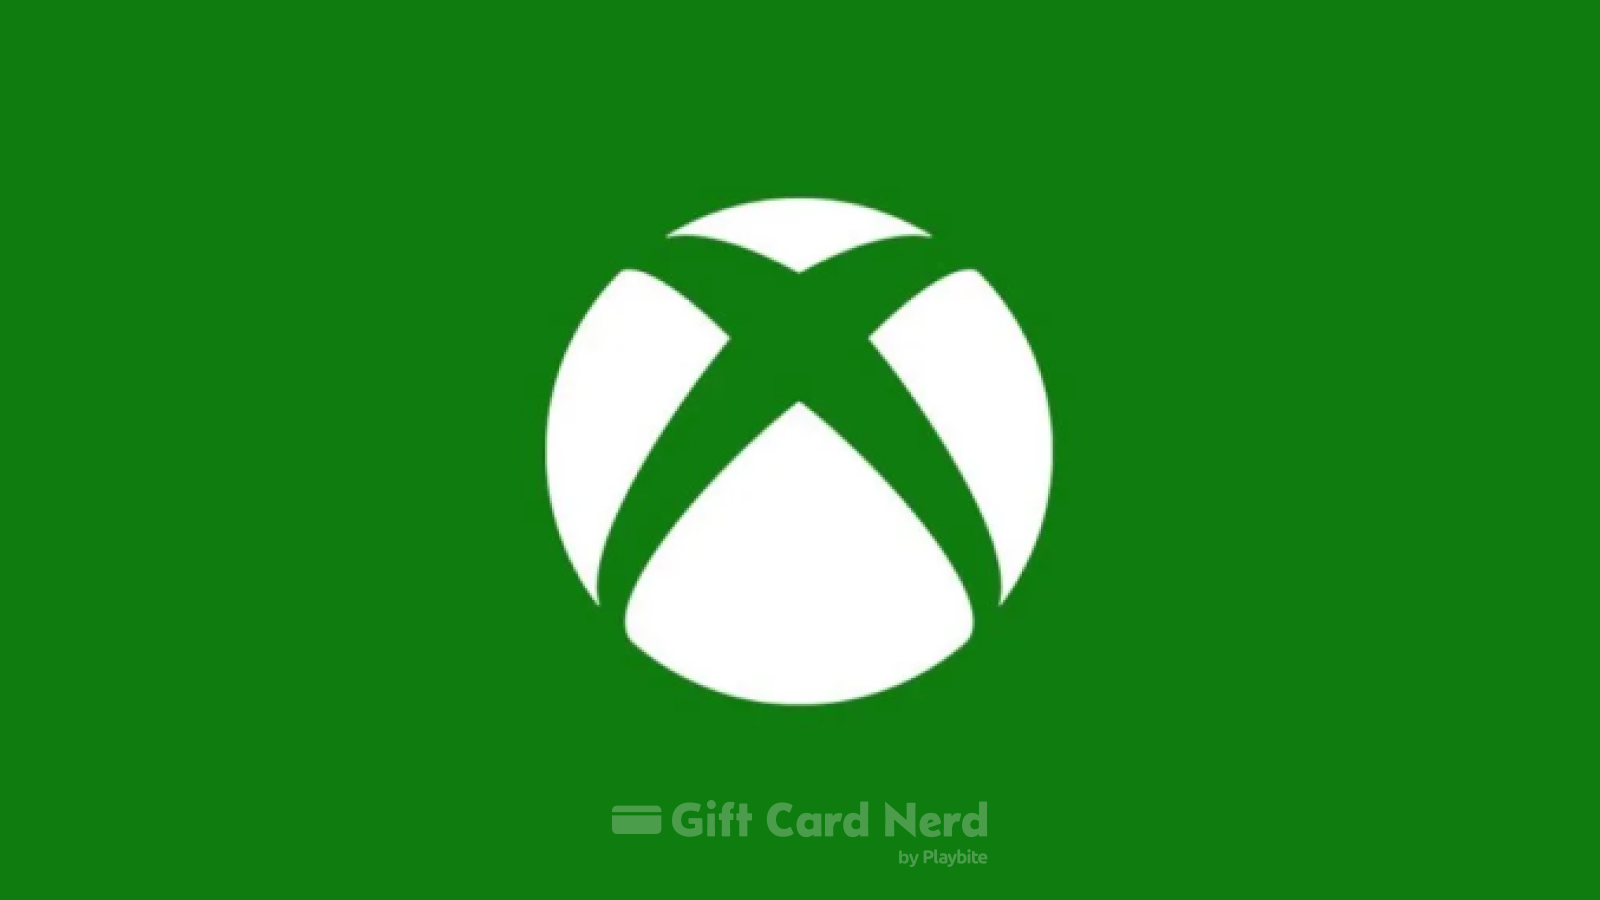 Can I Use an Xbox Gift Card on DoorDash?